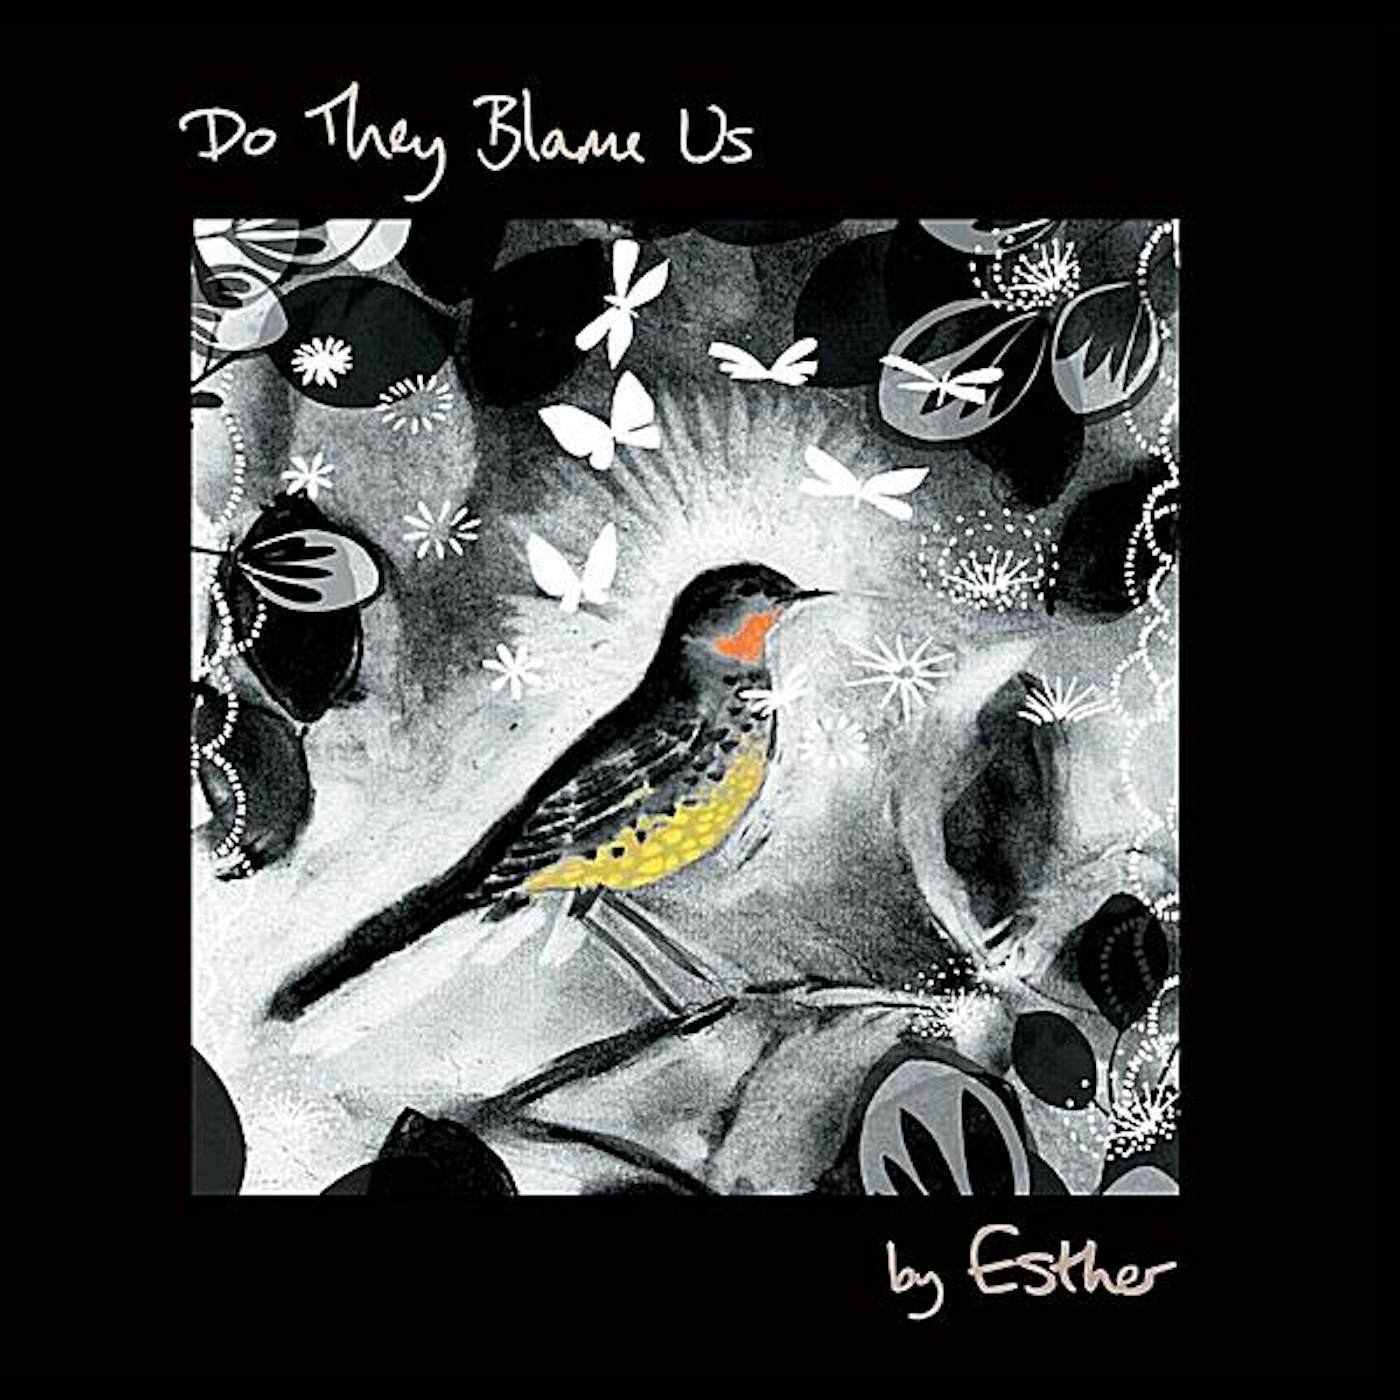 Esther DO THEY BLAME US CD